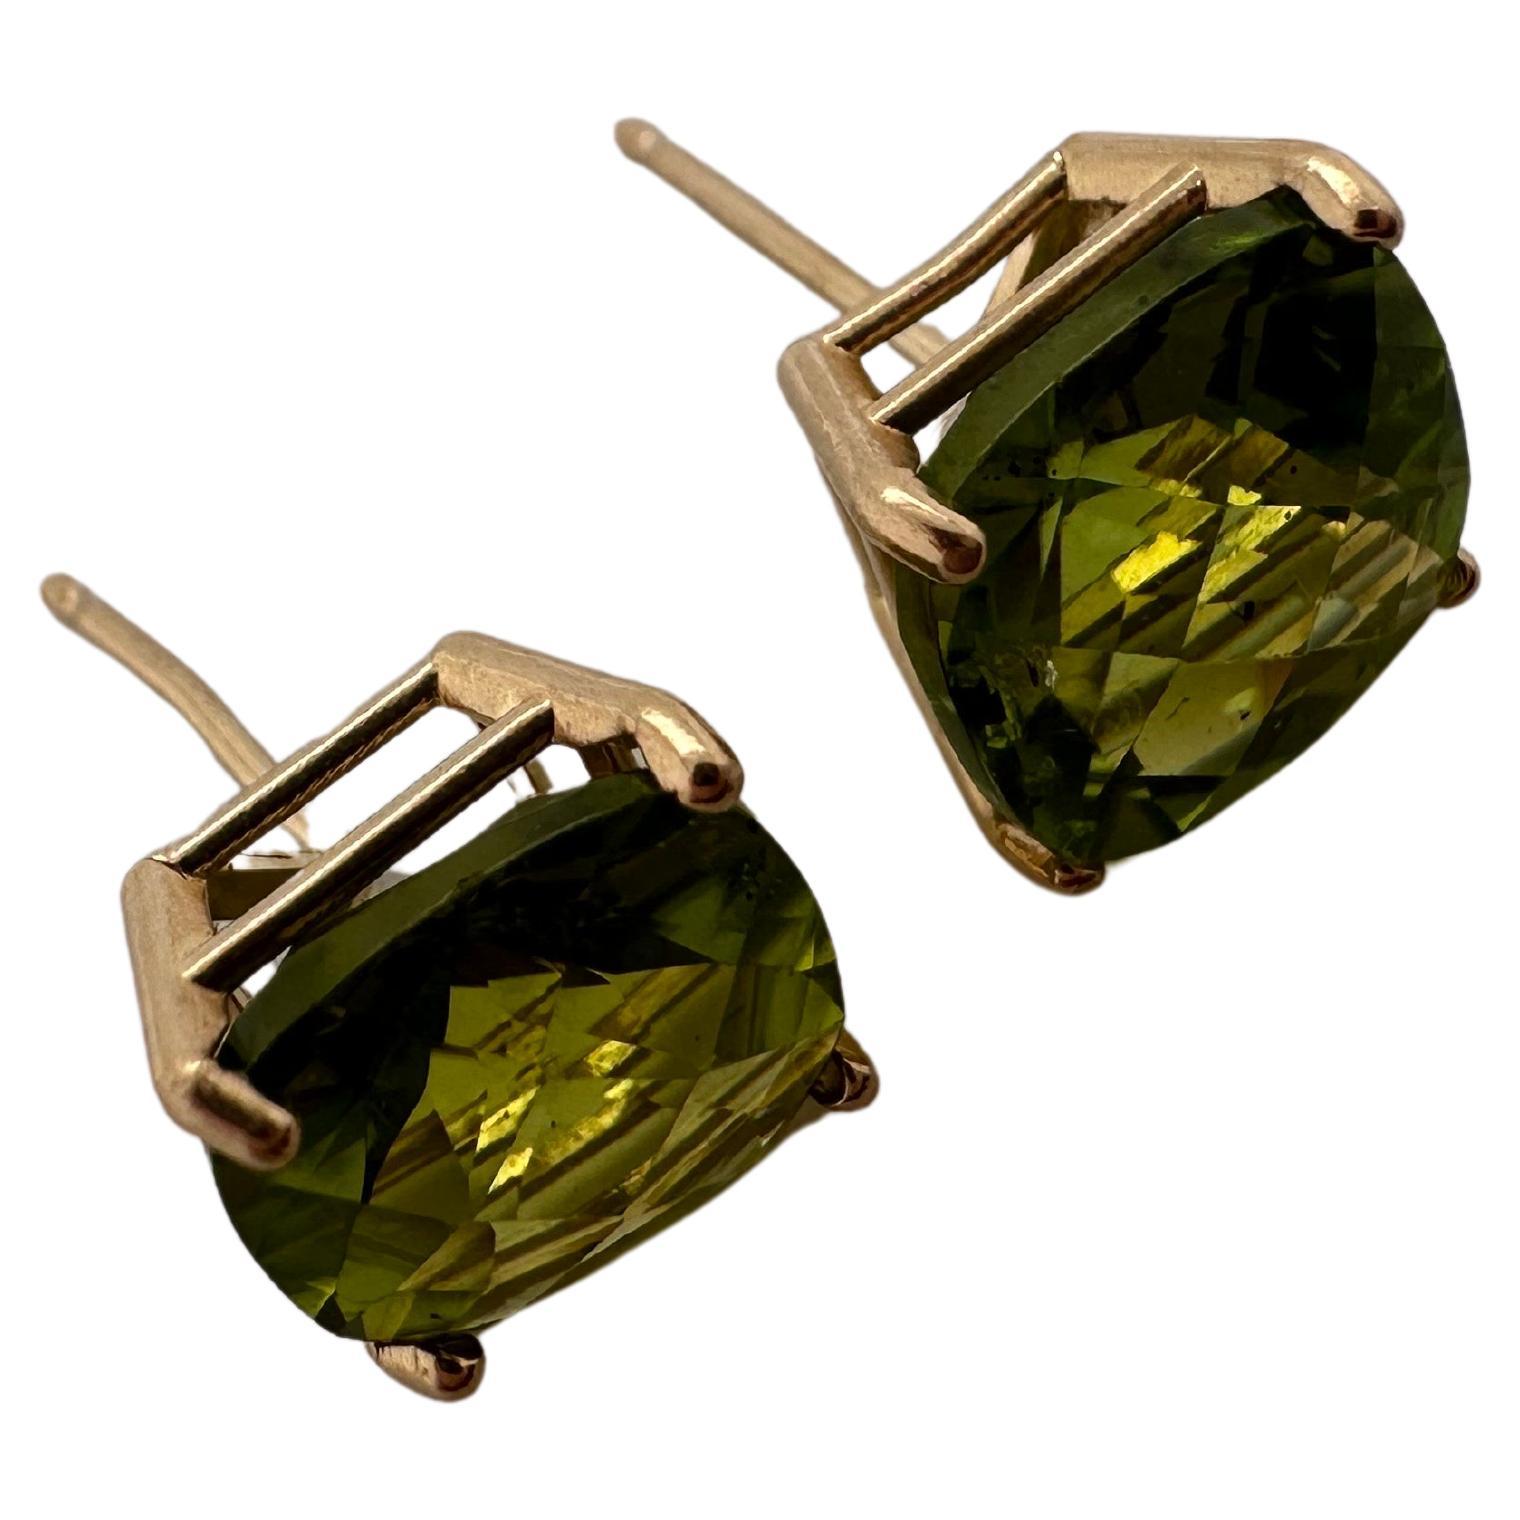 Peridot studs 8mm in 14kt yellow gold, 100% natural peridots originating from Brazil. Peridots are an august gemstone.

Certificate of authenticity comes with purchase

ABOUT US
We are a family-owned business. Our studio in located in the heart of